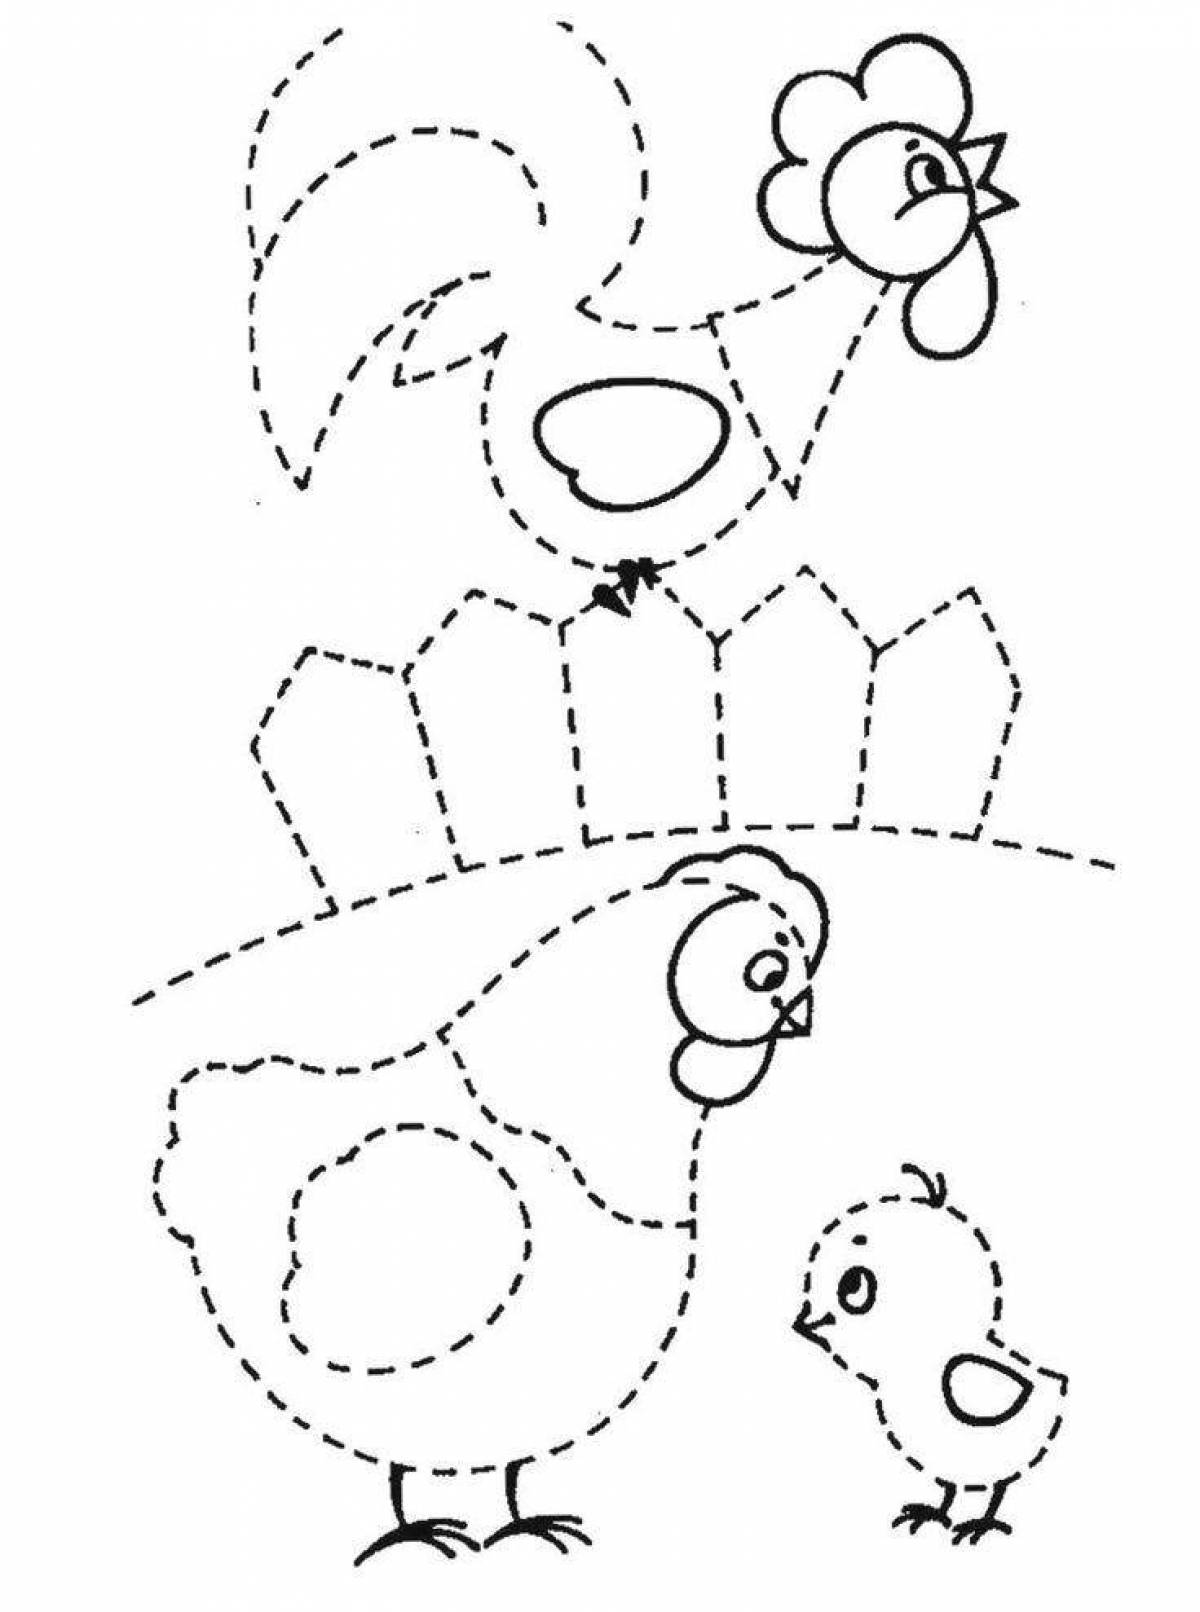 Fun dotted coloring book for preschoolers